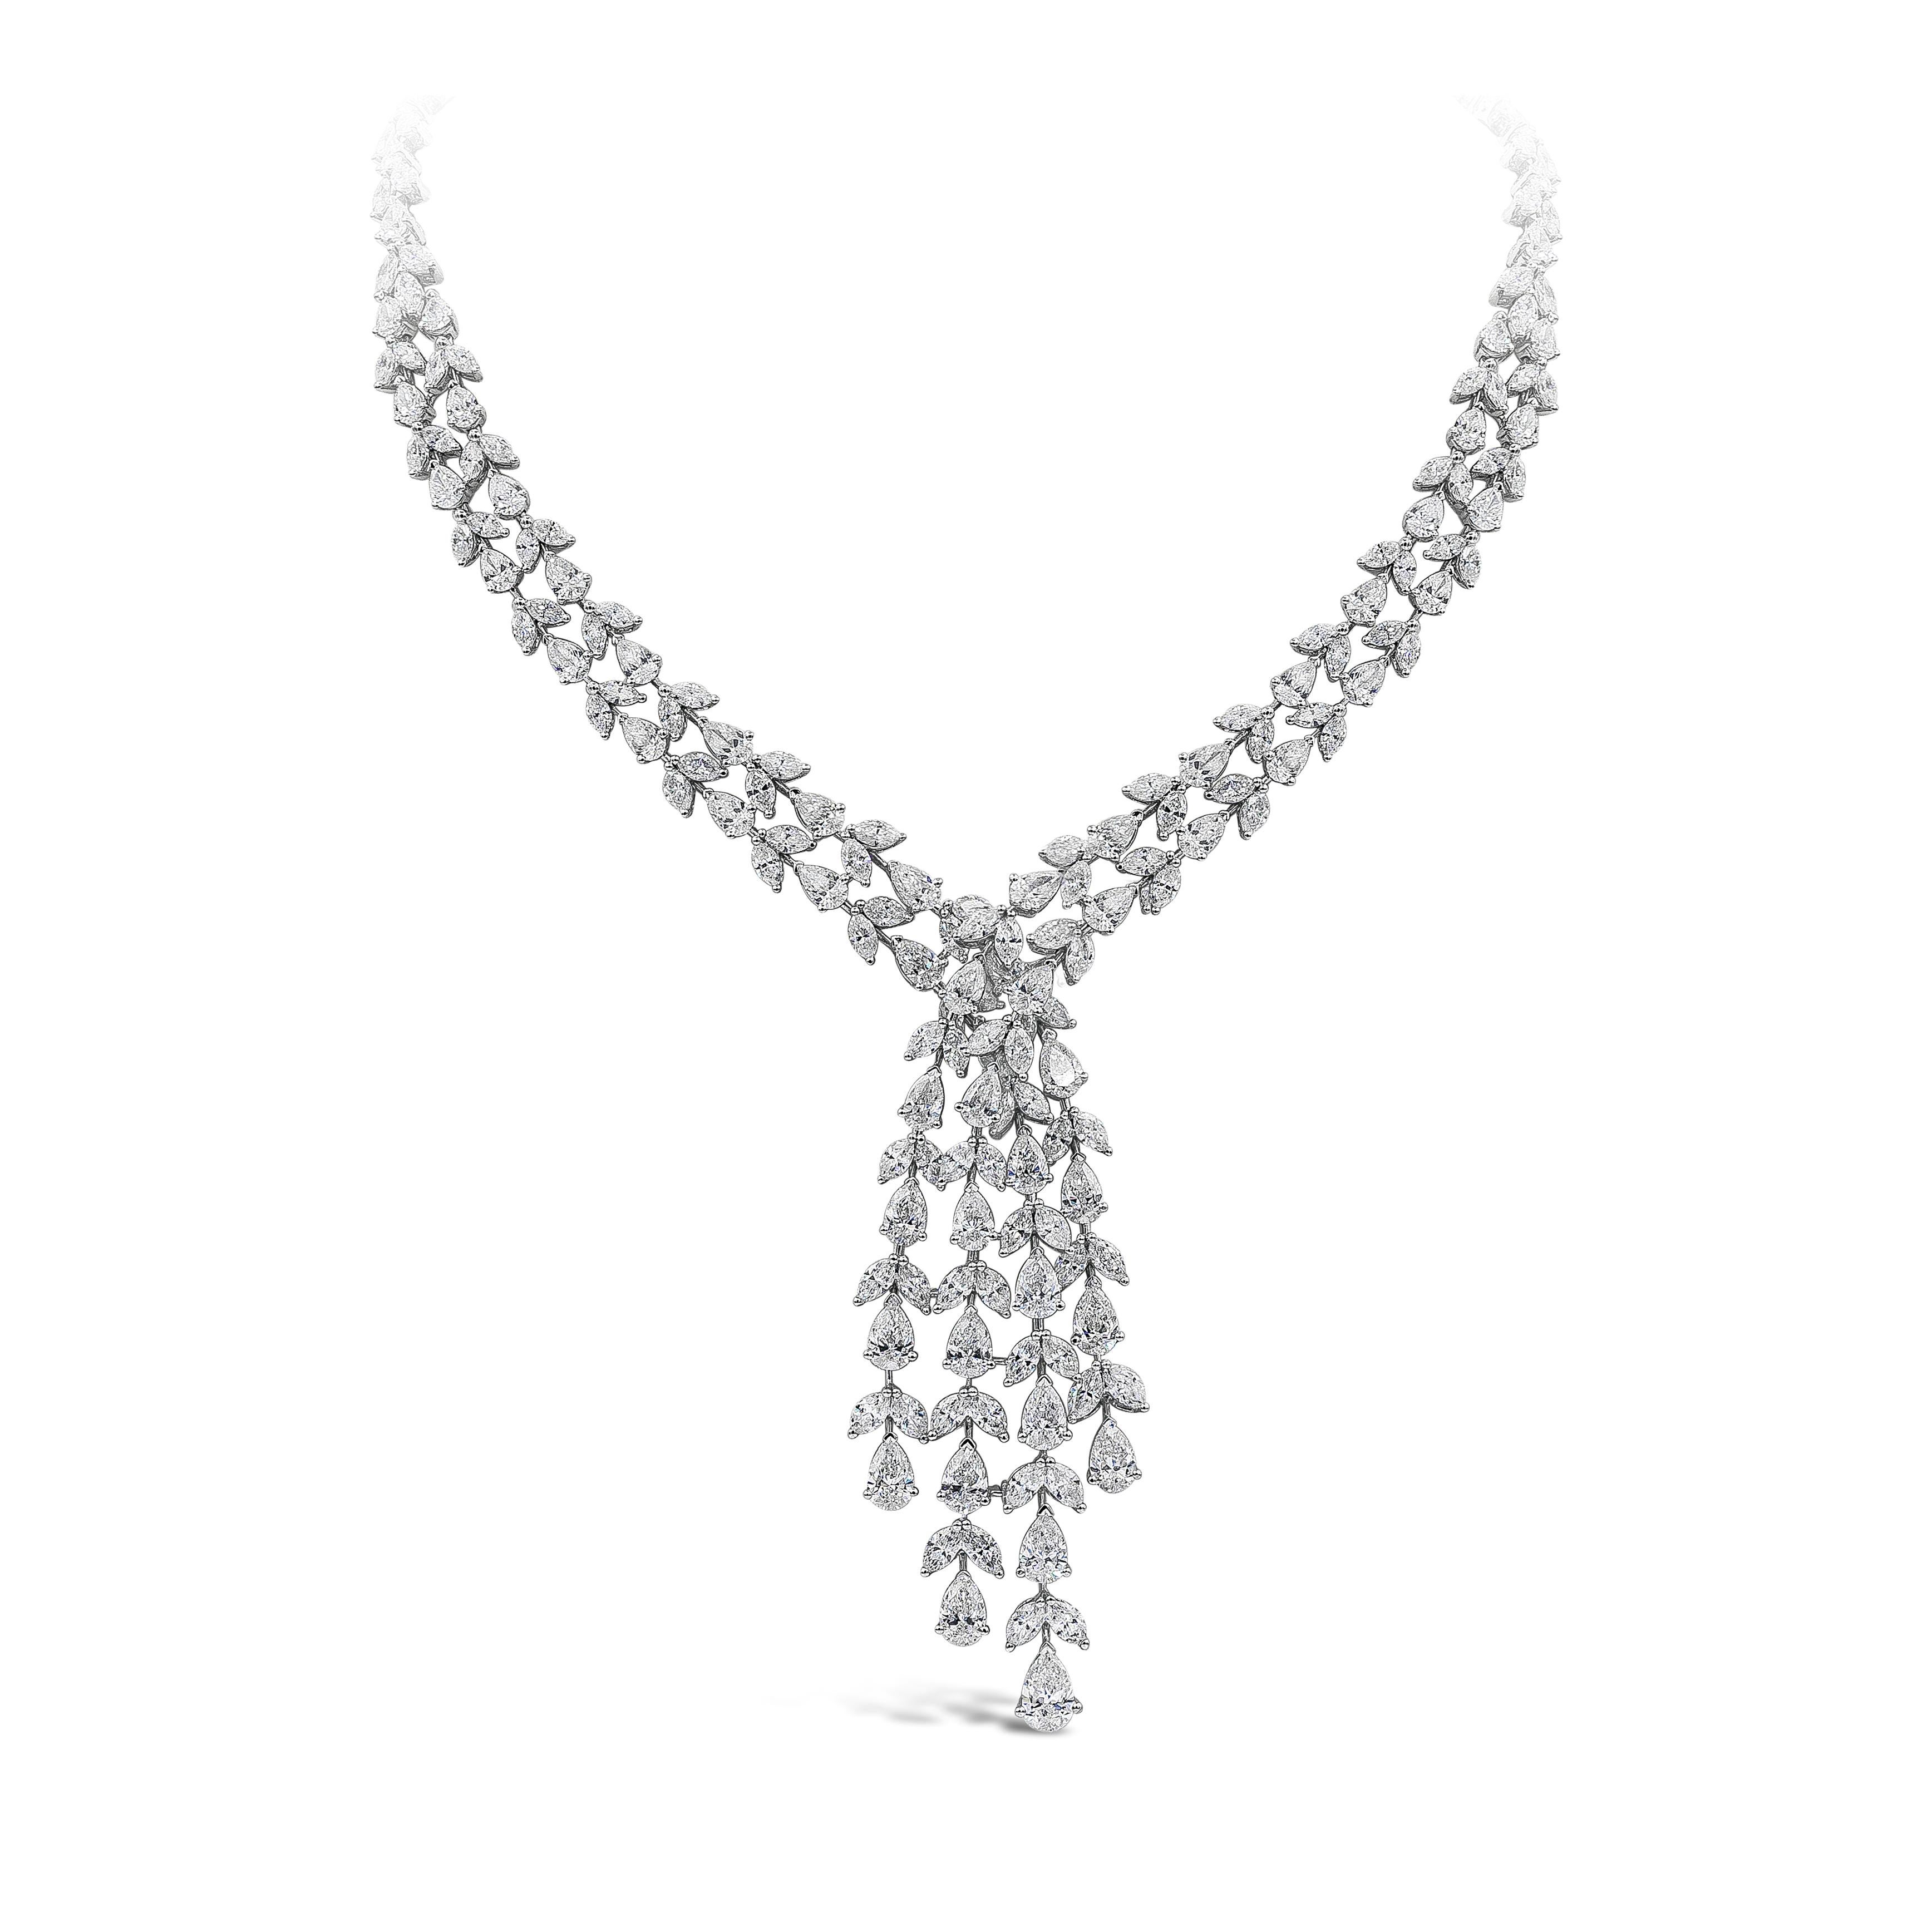 An important and luxurious necklace showcasing pear and marquise cut diamonds, set in an intricate and elegant open-work design. Diamonds weigh 40.94 carats total. Made in 18 karat white gold. 

